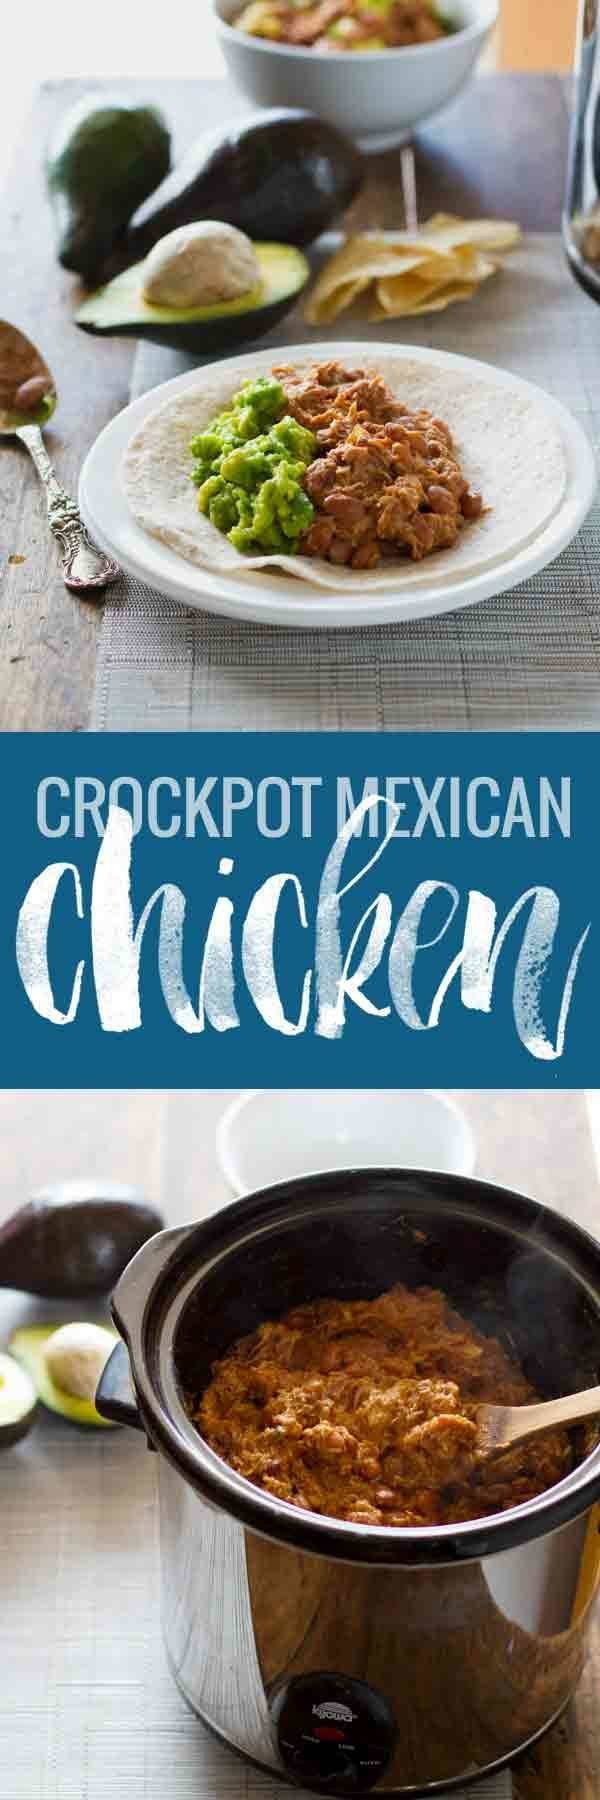 A 5-ingredient crockpot recipe for Mexican-style chicken and pinto beans. Perfect for easy burritos, tacos, and enchiladas. 185 calories per serving.